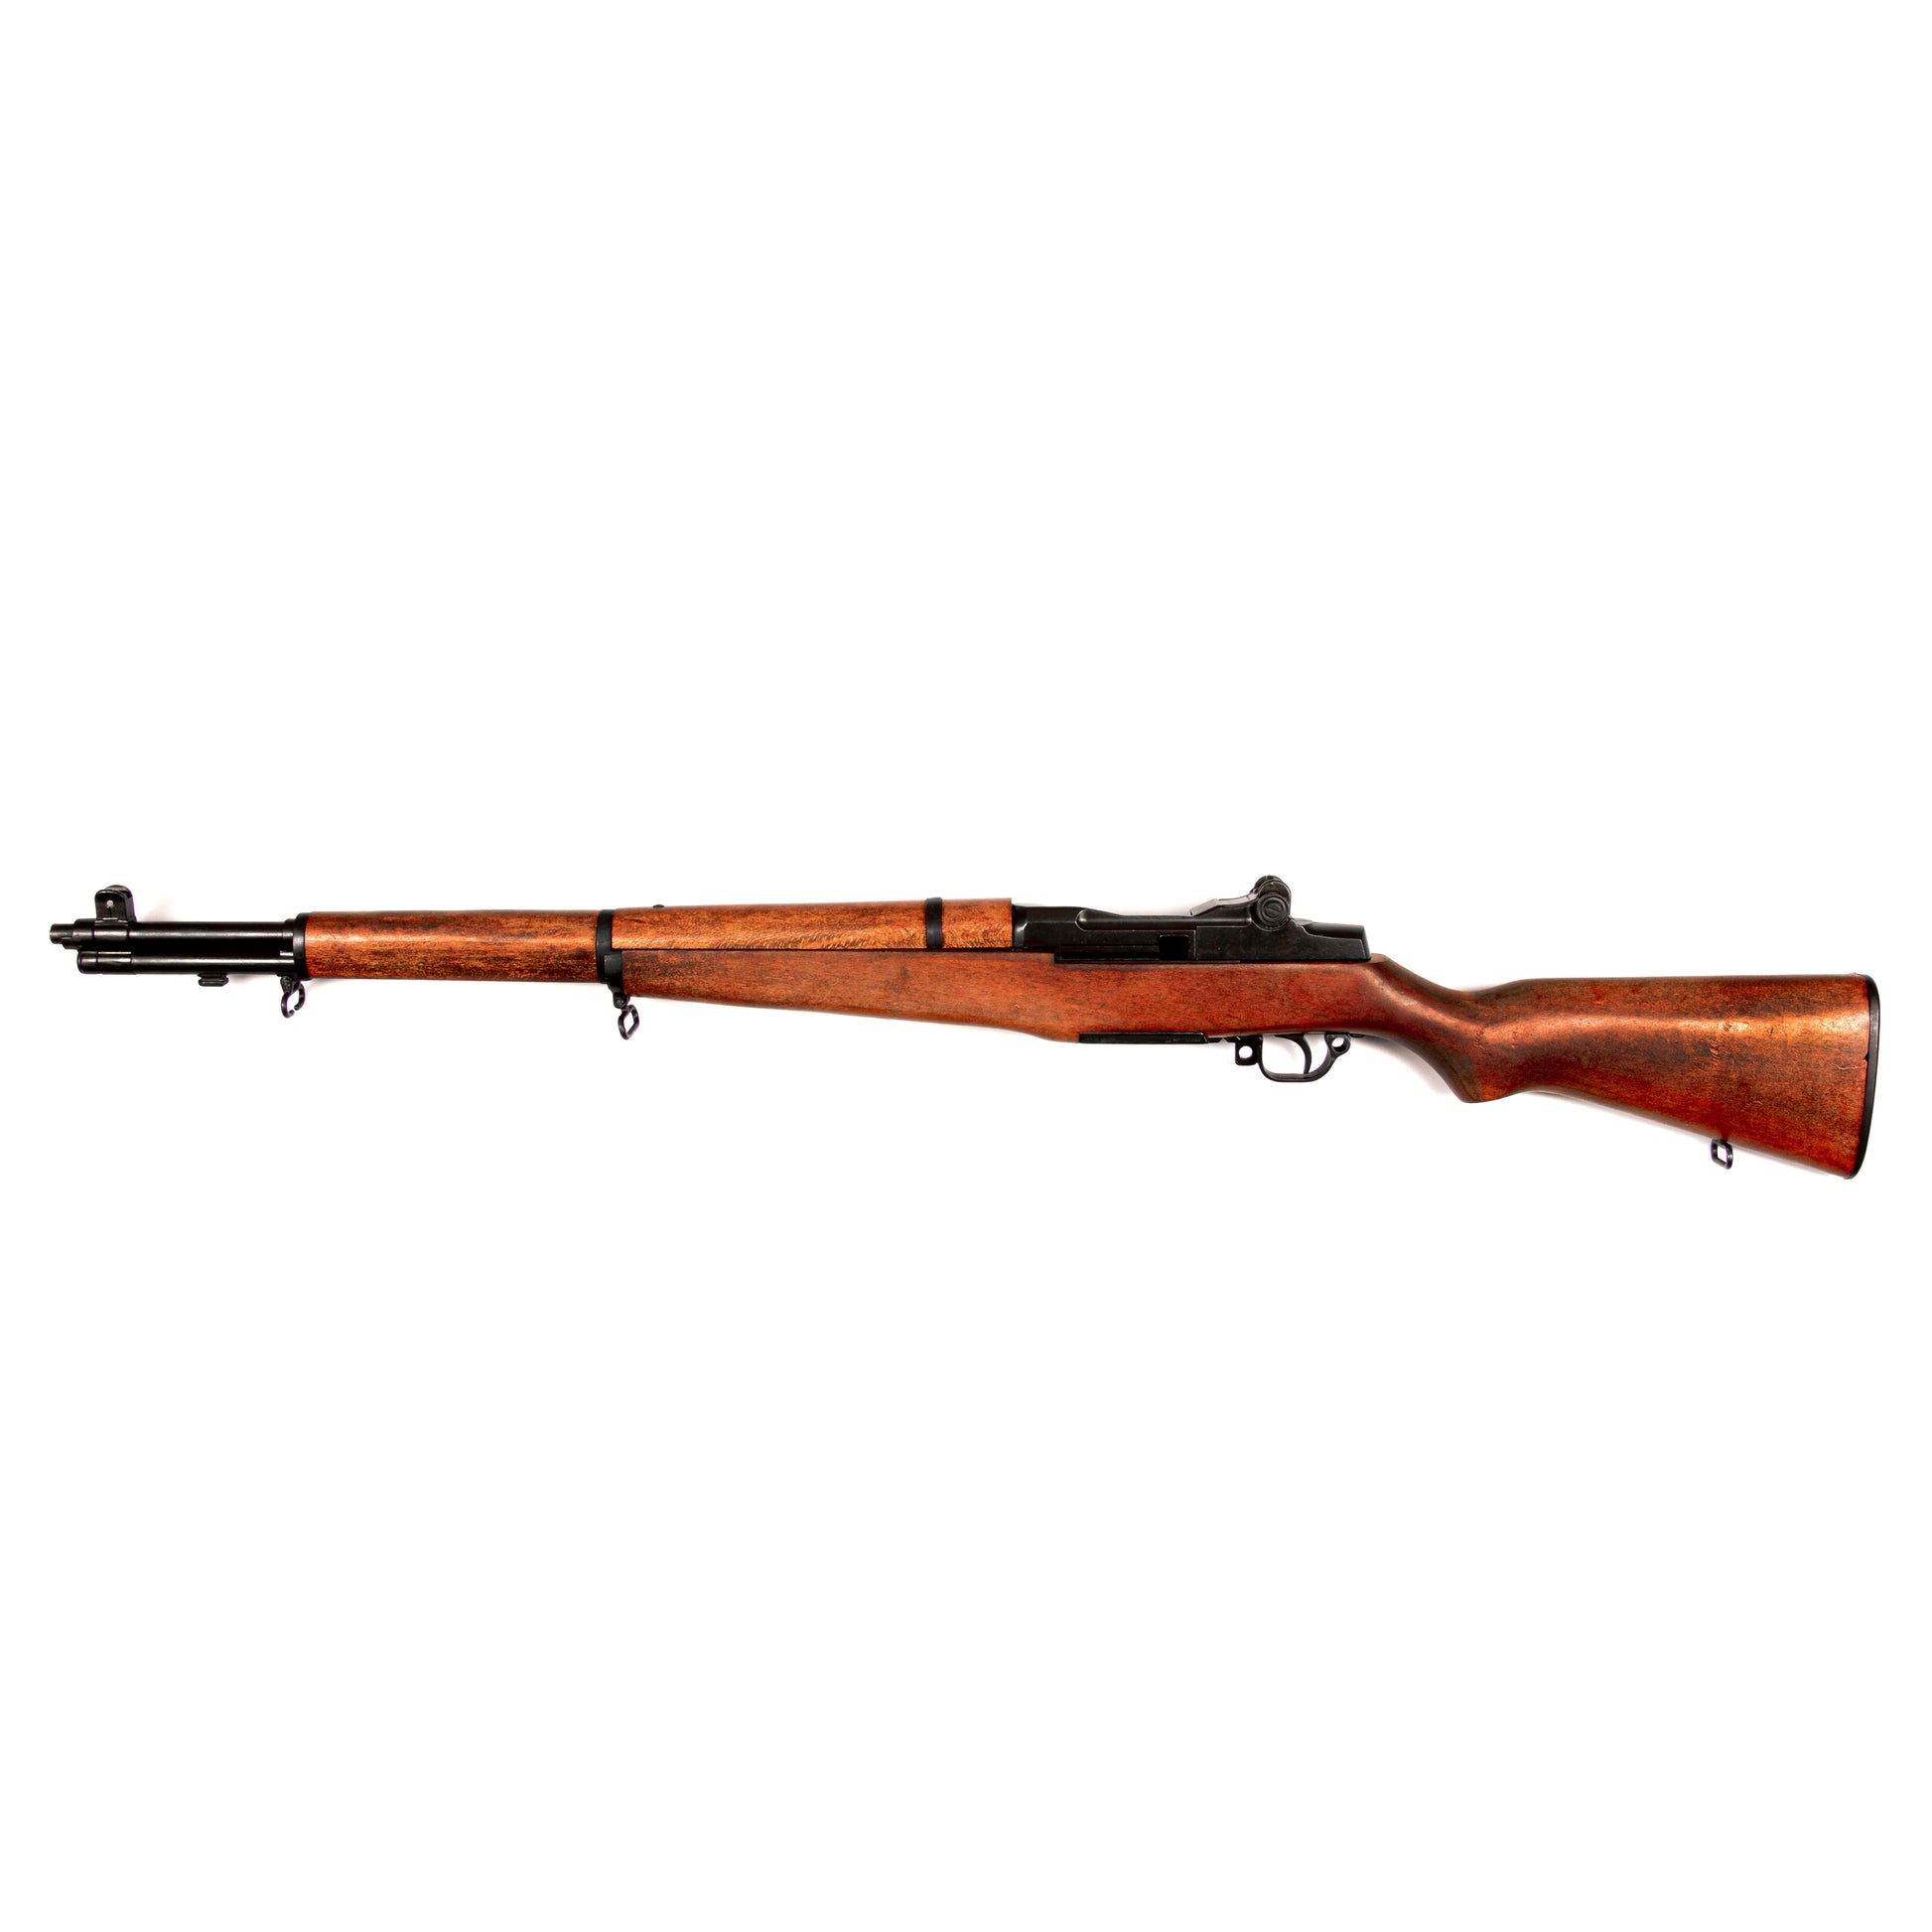 WWII M1 Rifle Non-Firing Left Side View